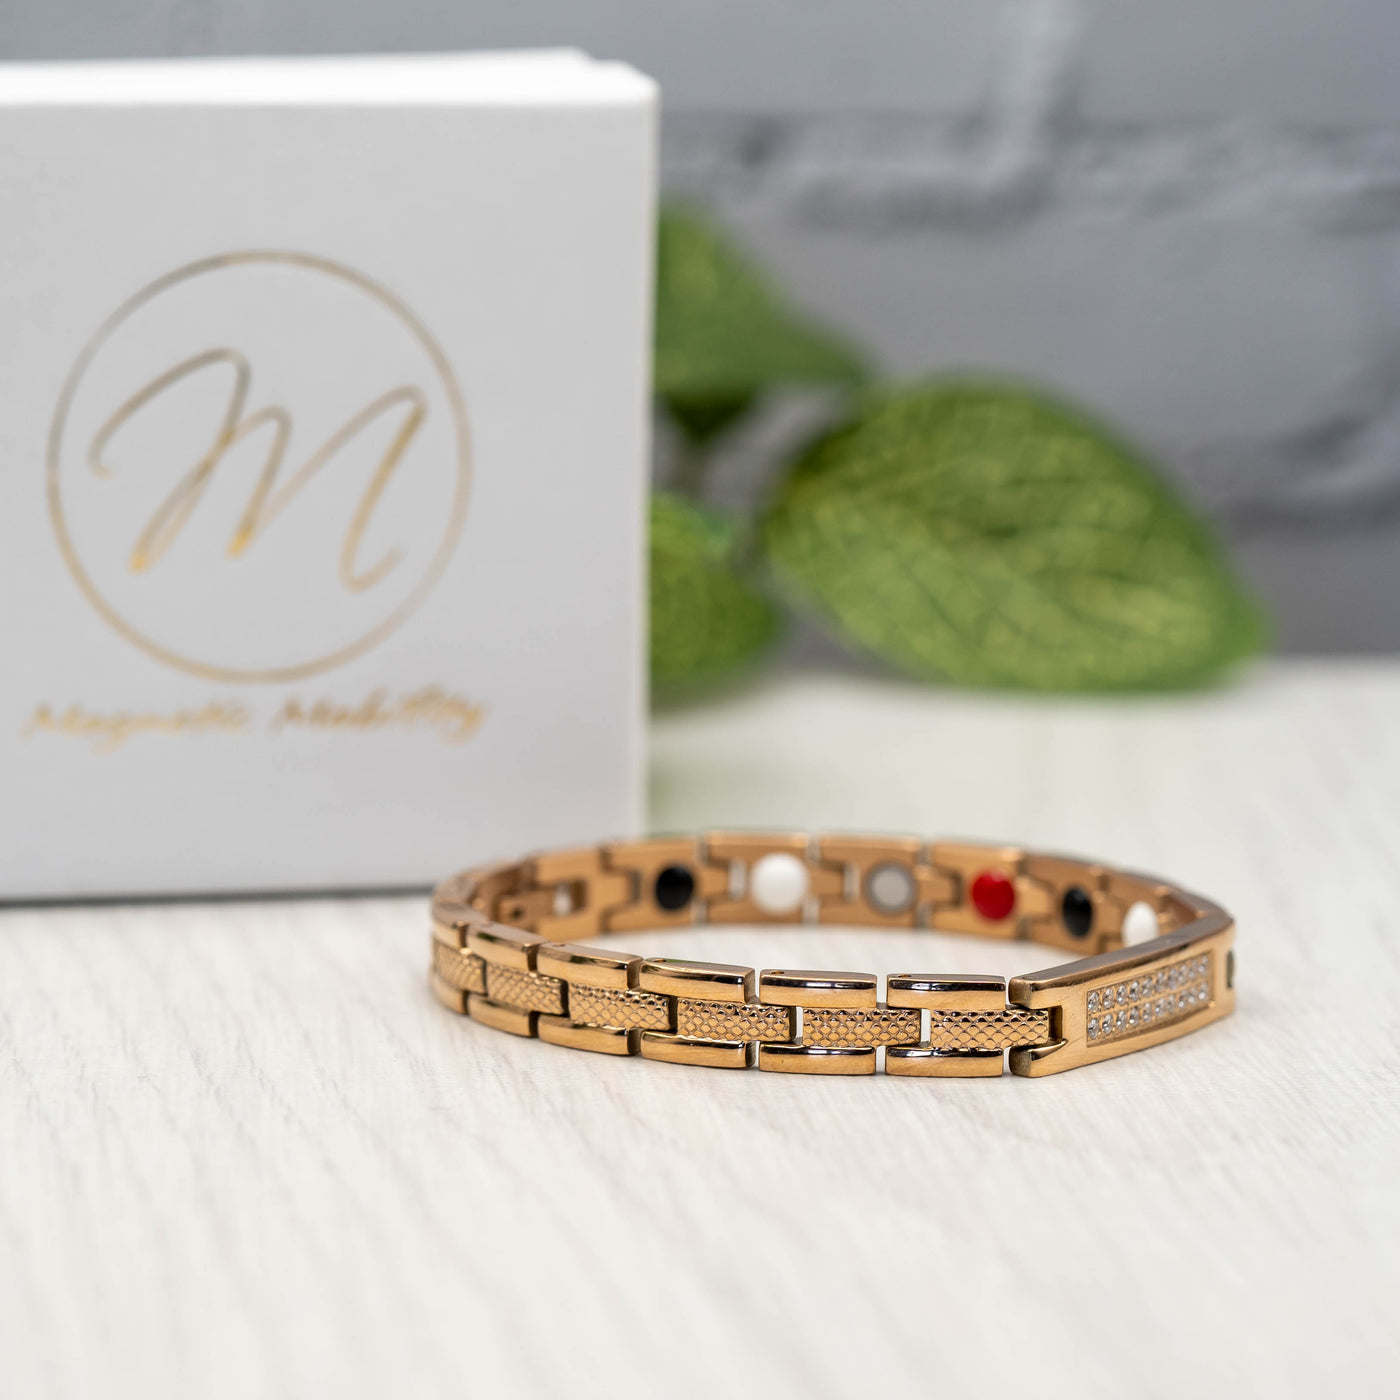 Honesty Dawn - Women's 4in1 Magnetic Bracelet, Rose gold plated stainless steel with swarovski crystals. Side view of bracelet